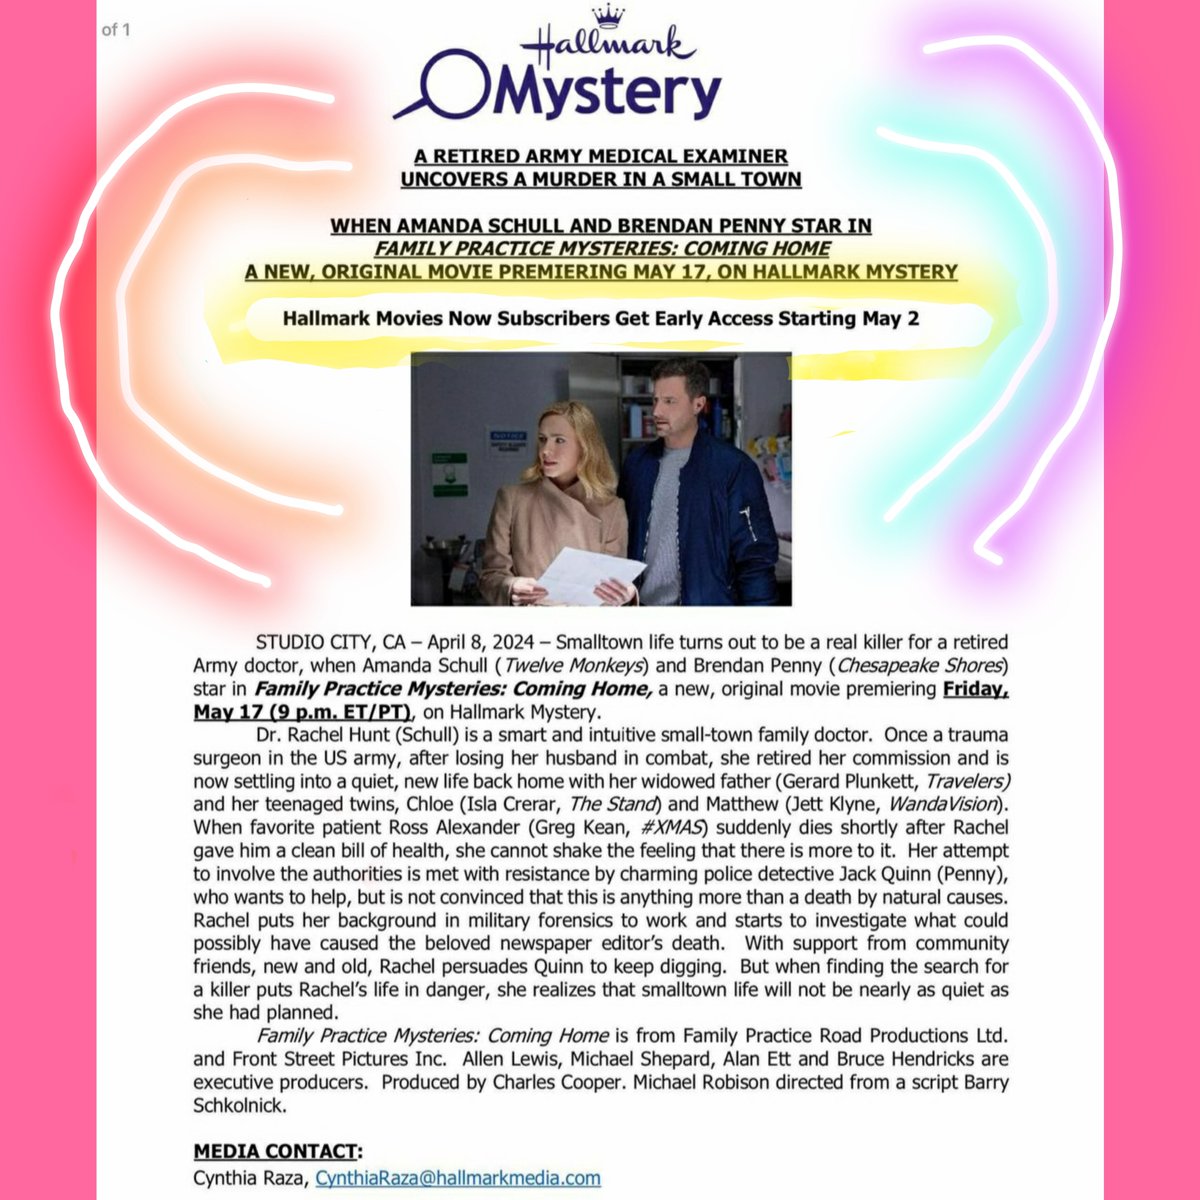 Hallmark Mysteries Press Release for Family Practice Mysteries: Coming Home starring Brendan Penny & Amanda Schull & fun news! It will be able to stream early on Hallmark Movies Now on May 2nd, 15 days before its Friday May 17th premiere on Hallmark Mystery🔍🔎

📸 Hallmark Media